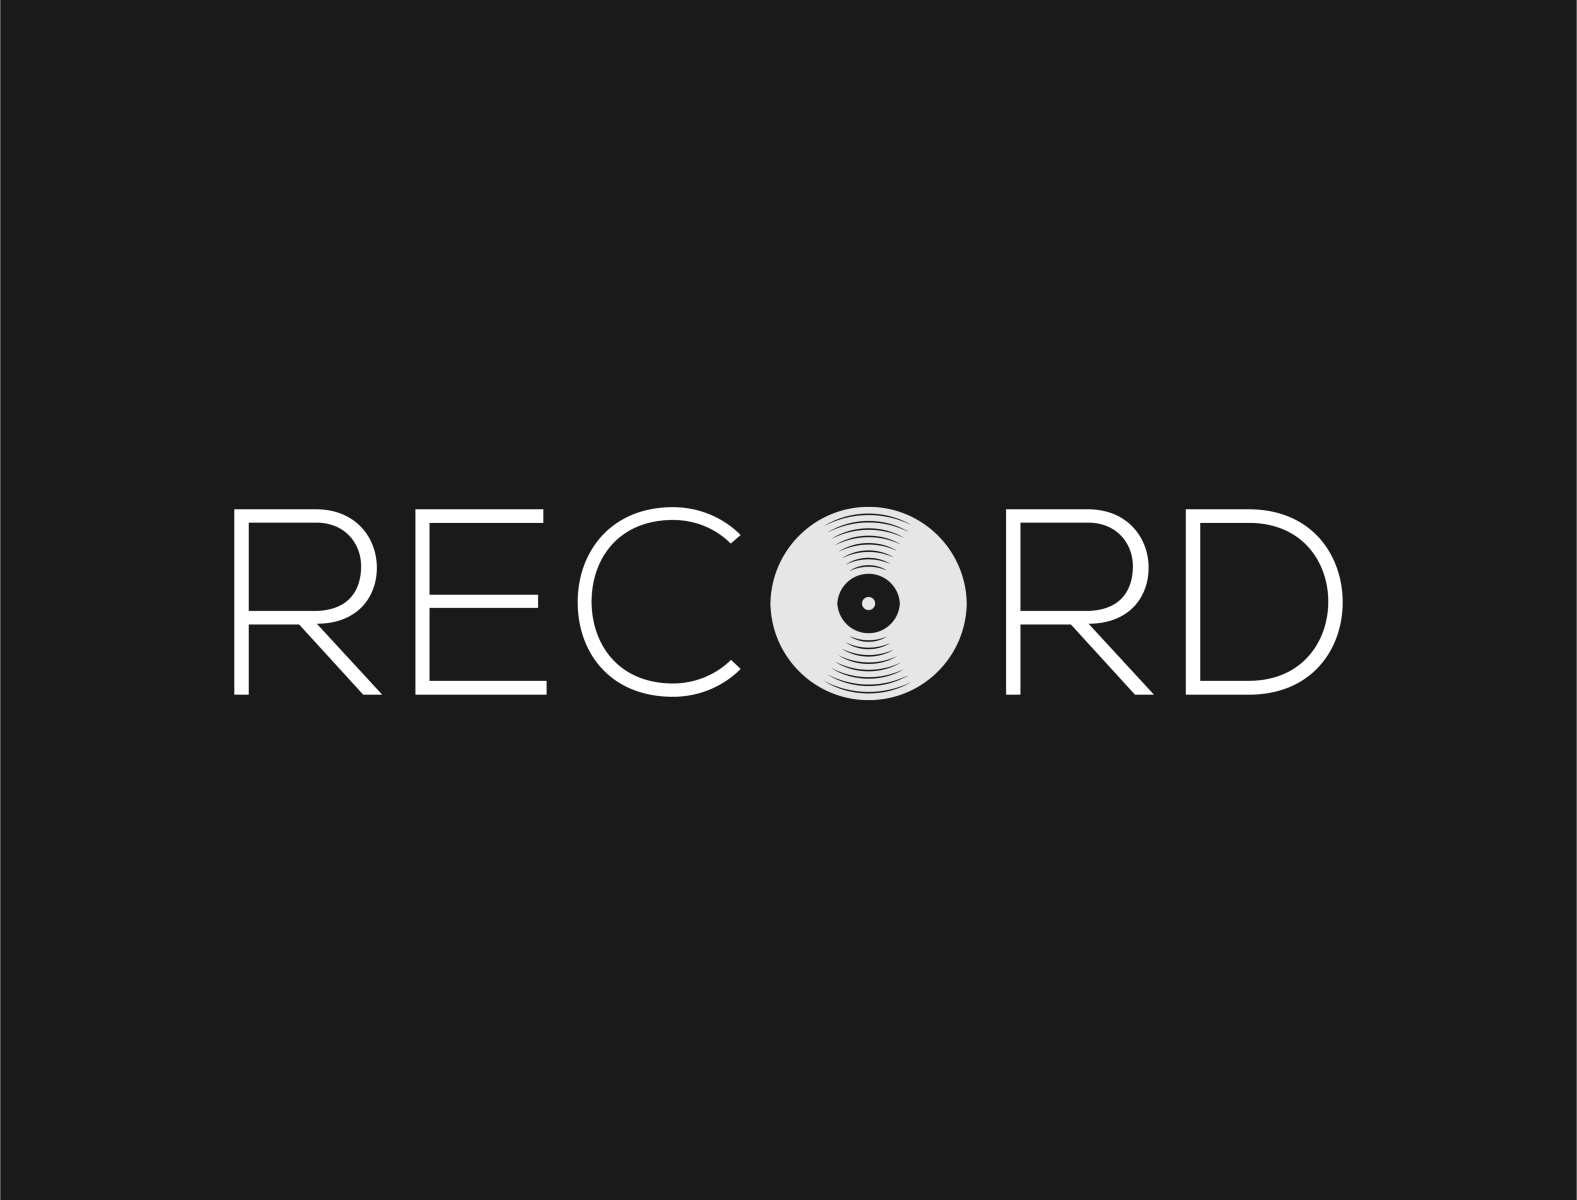 Record Logo Concept by MyGraphicLab on Dribbble